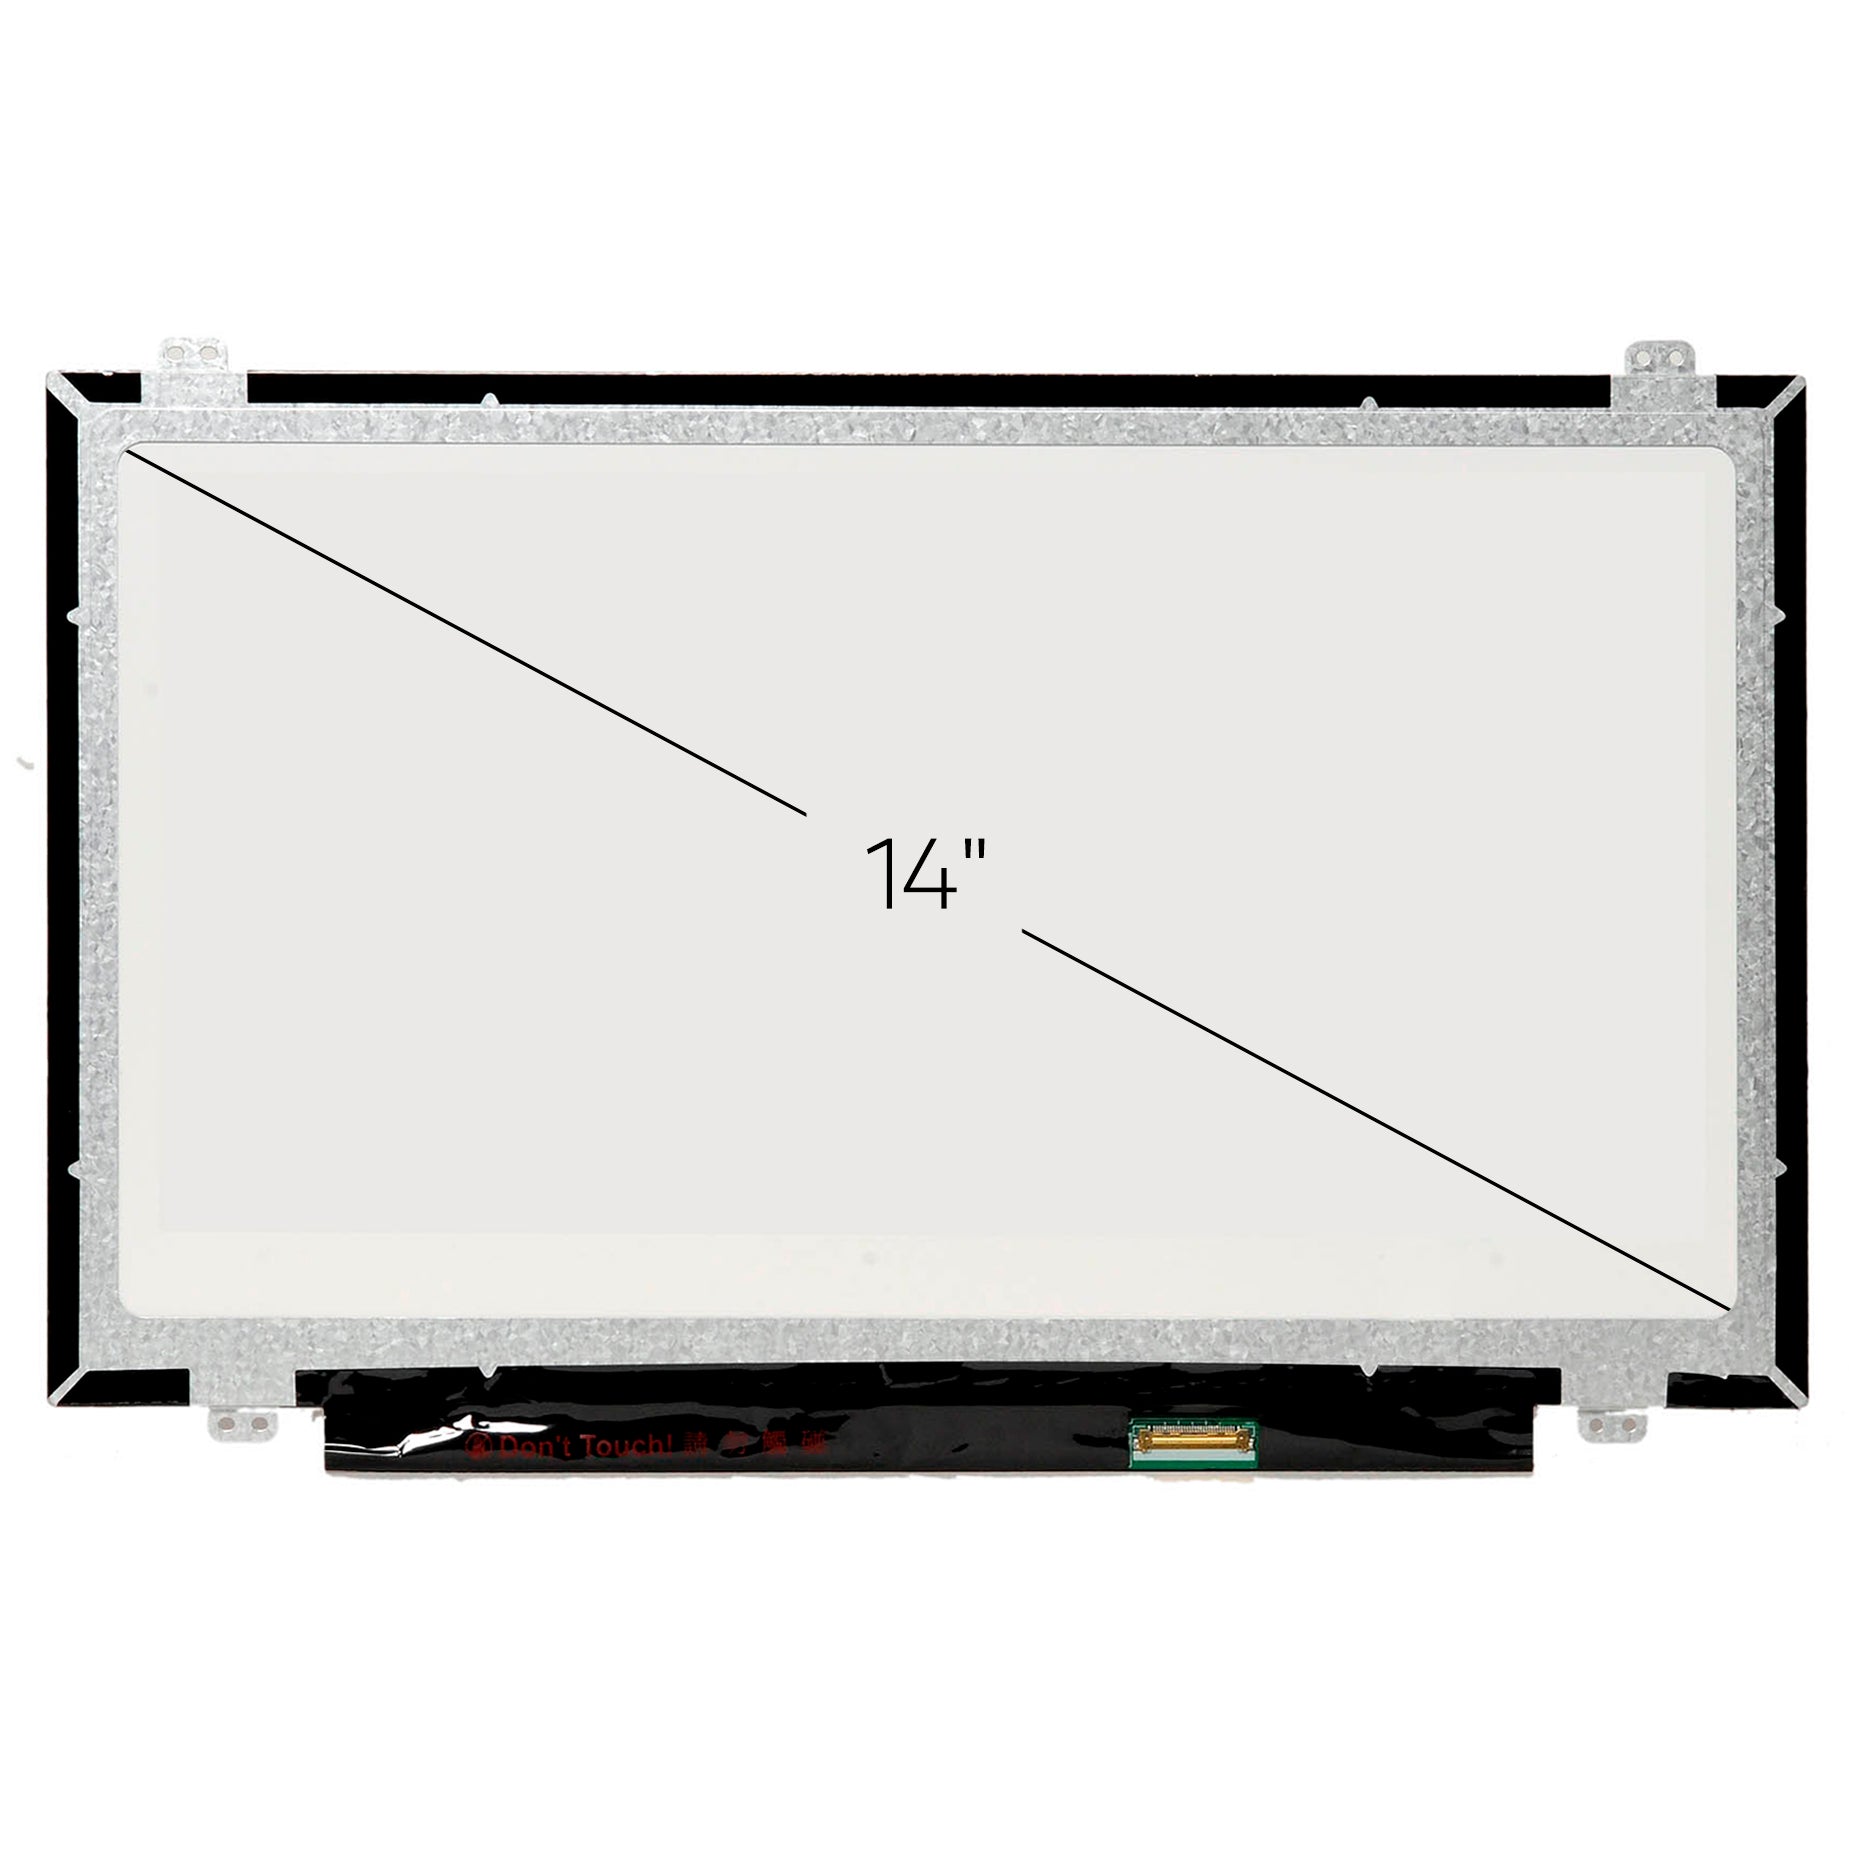 Screen Replacement for HP Elitebook 840 G2 HD 1366x768 Glossy LCD LED Display